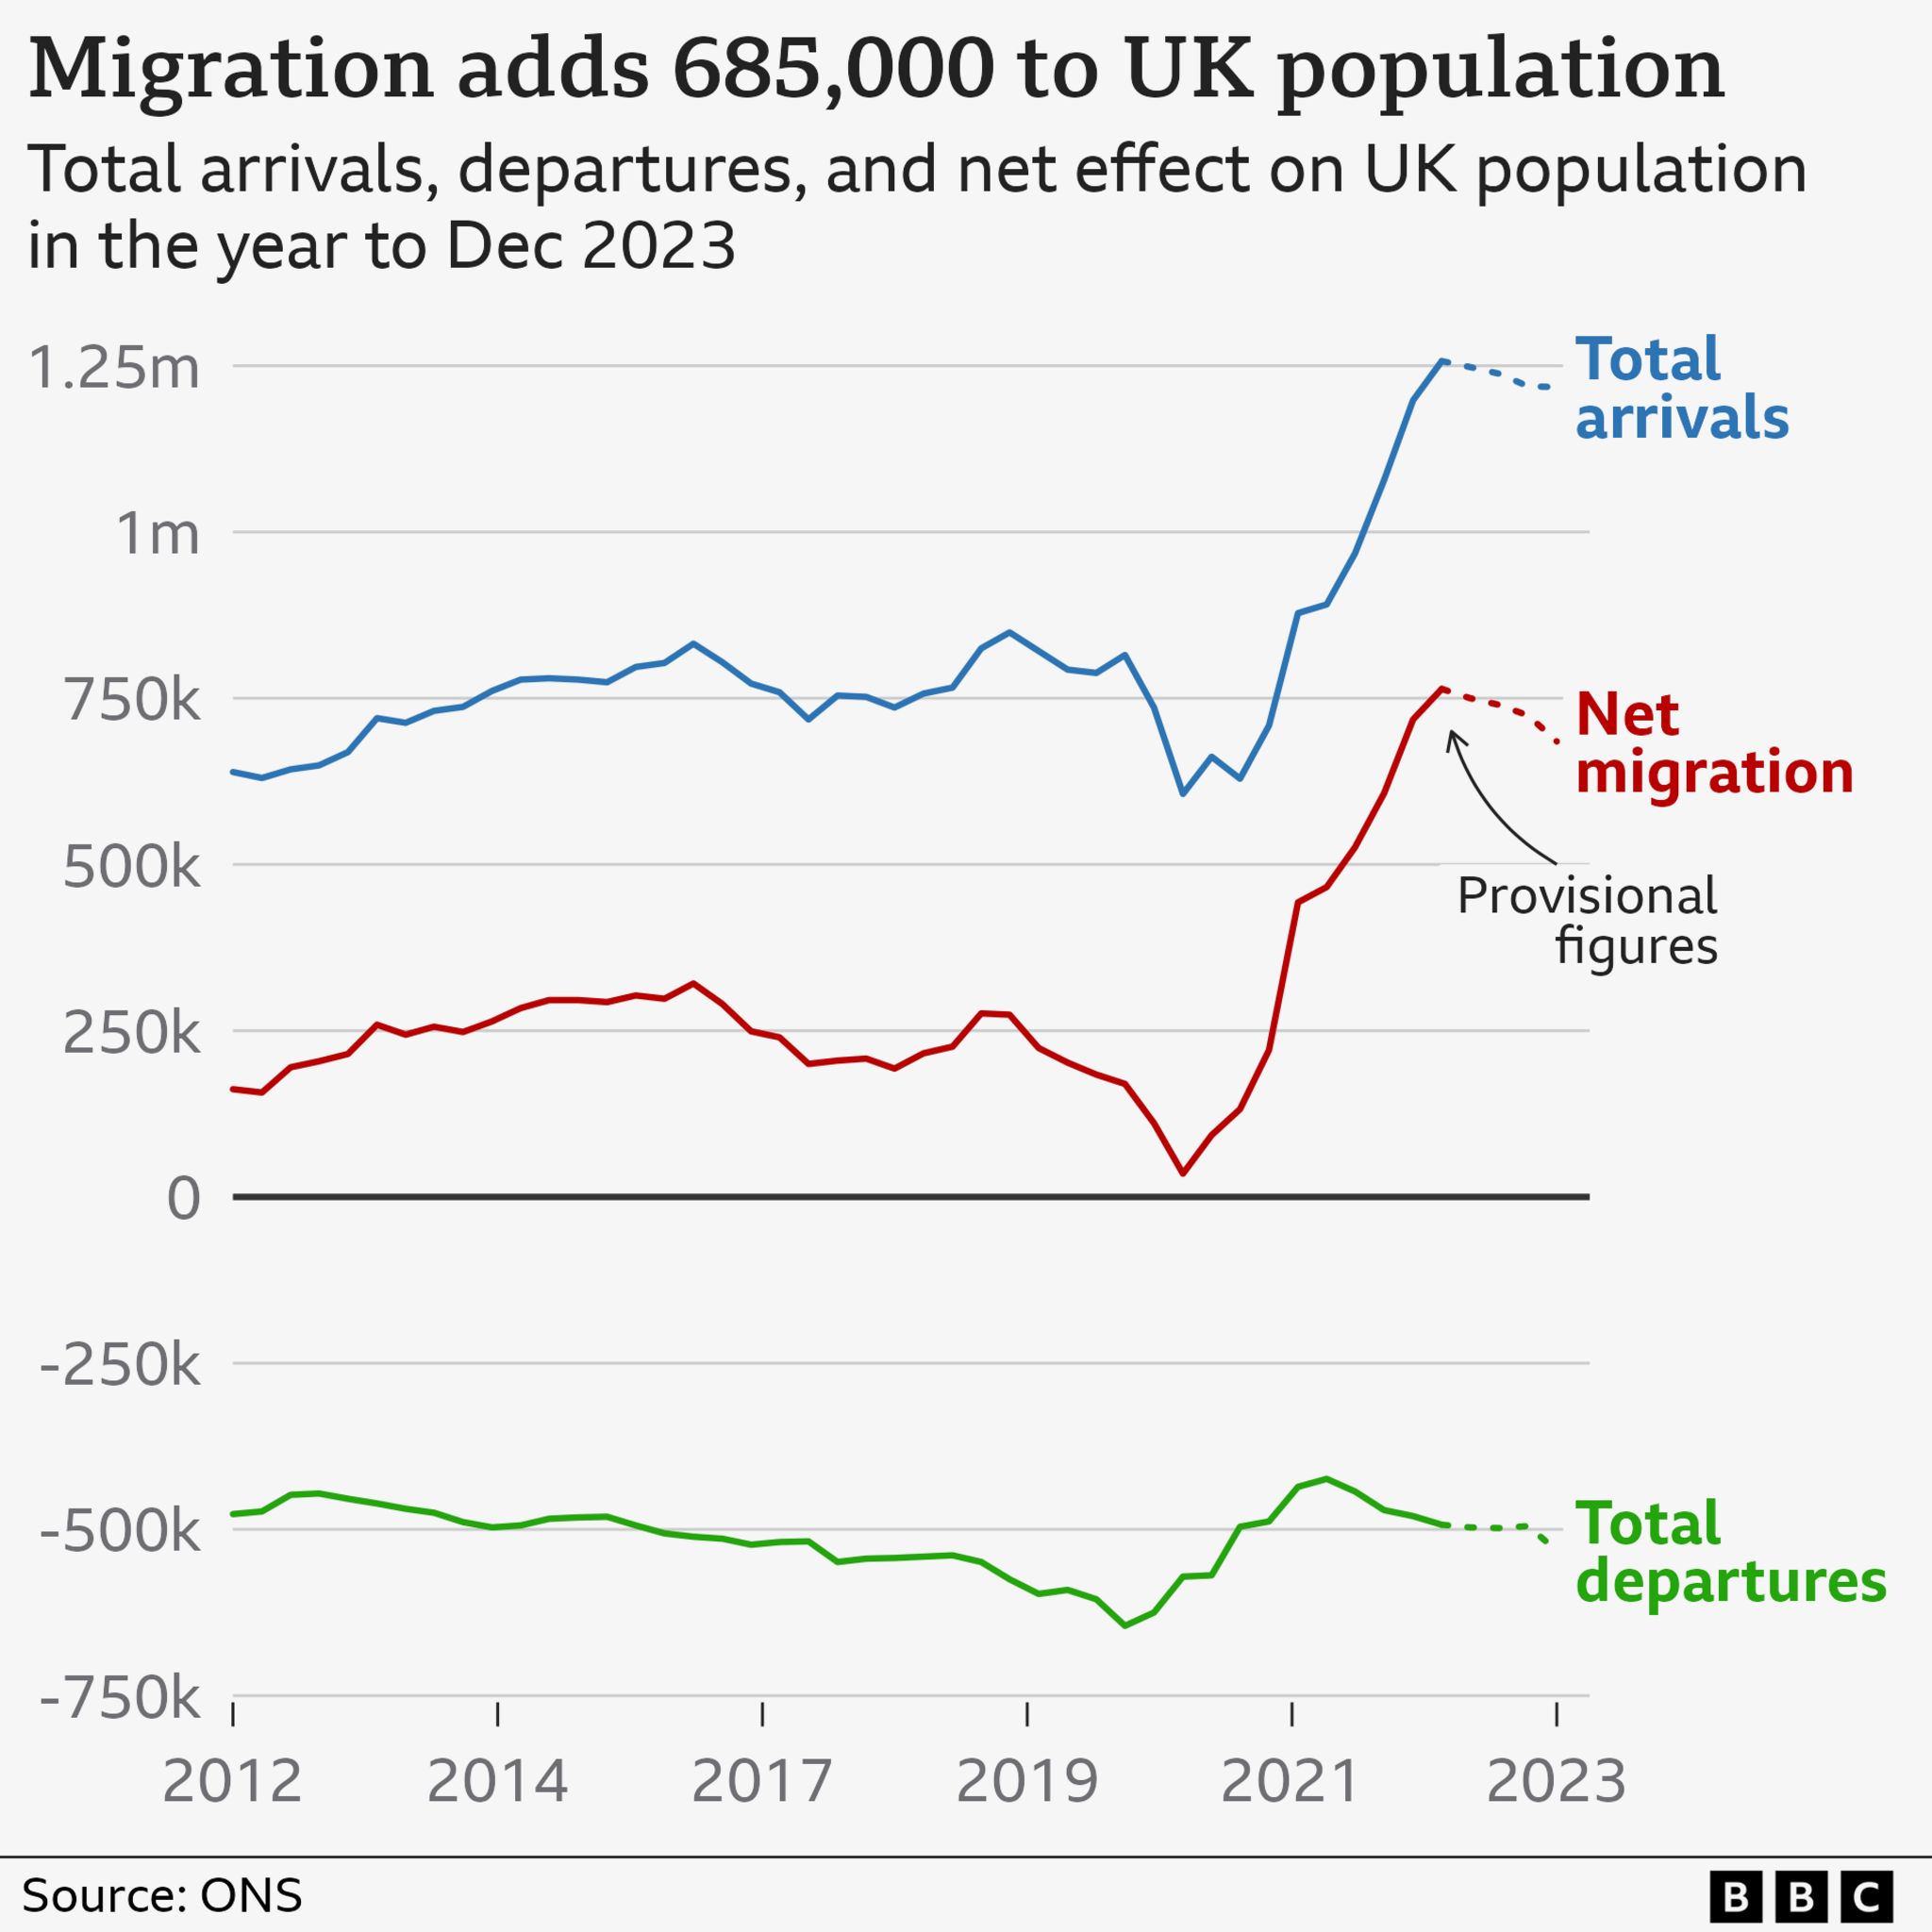 Graph showing arrivals to the UK, the number of departures and a line in the middle showing the impact on net migration, which hit a peak of 764,000 in 2020 before falling to 685,000 in 2023